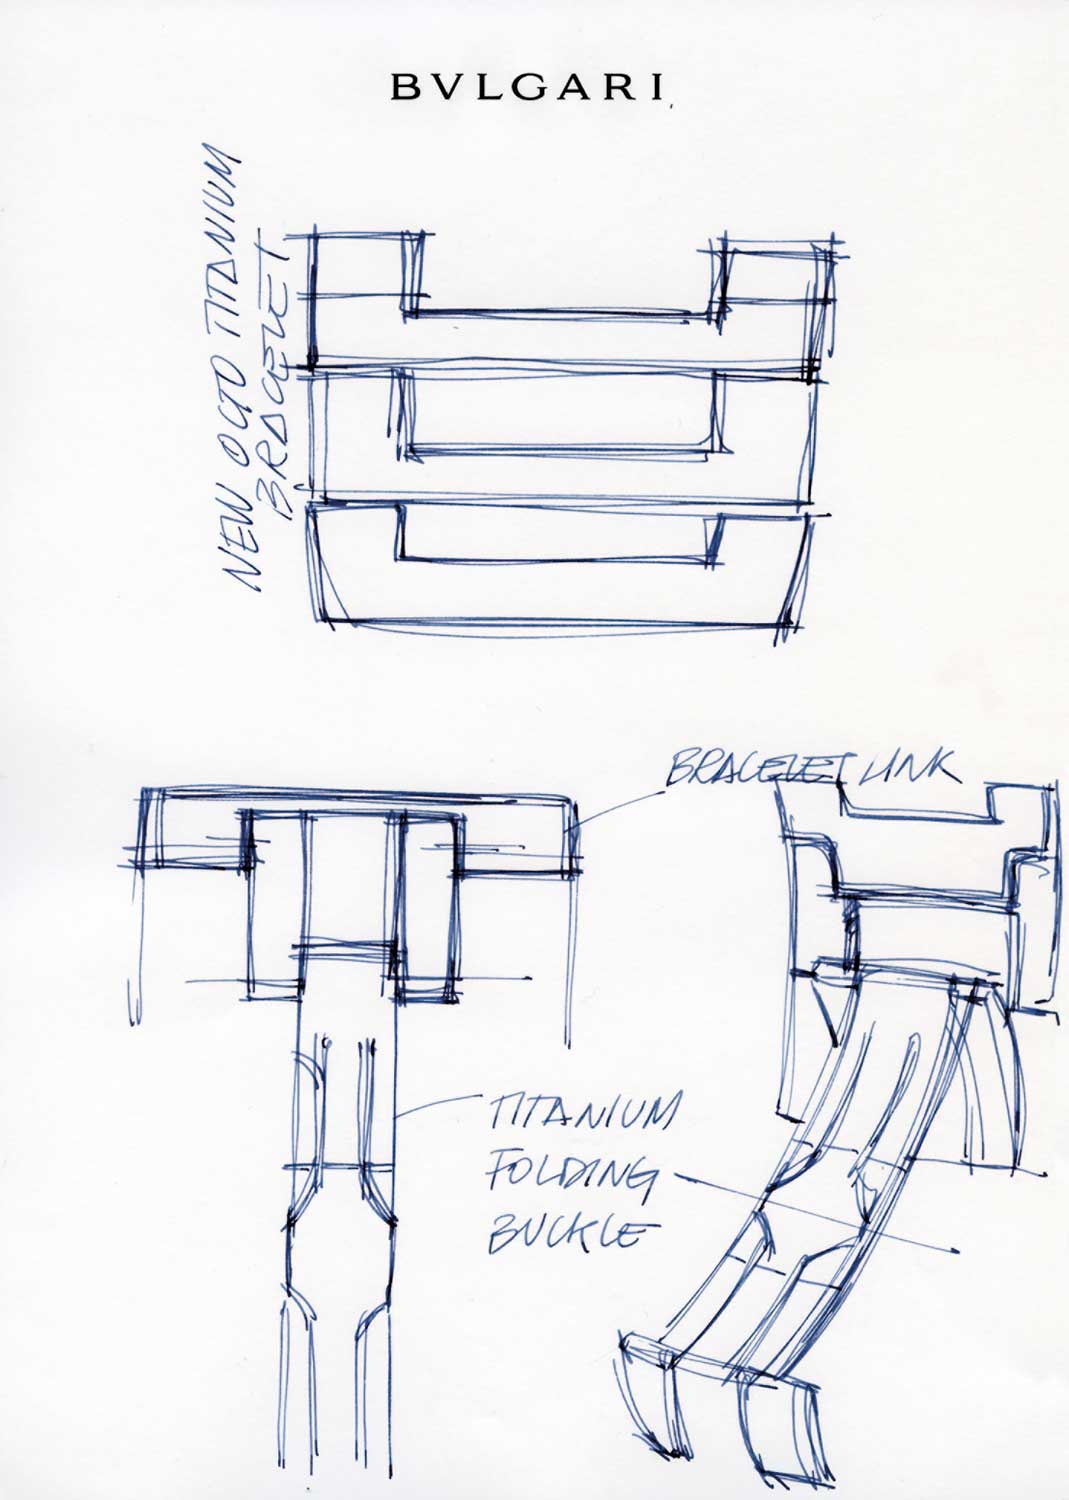 Drawings showing the conception of the Octo Finissimo's bracelet